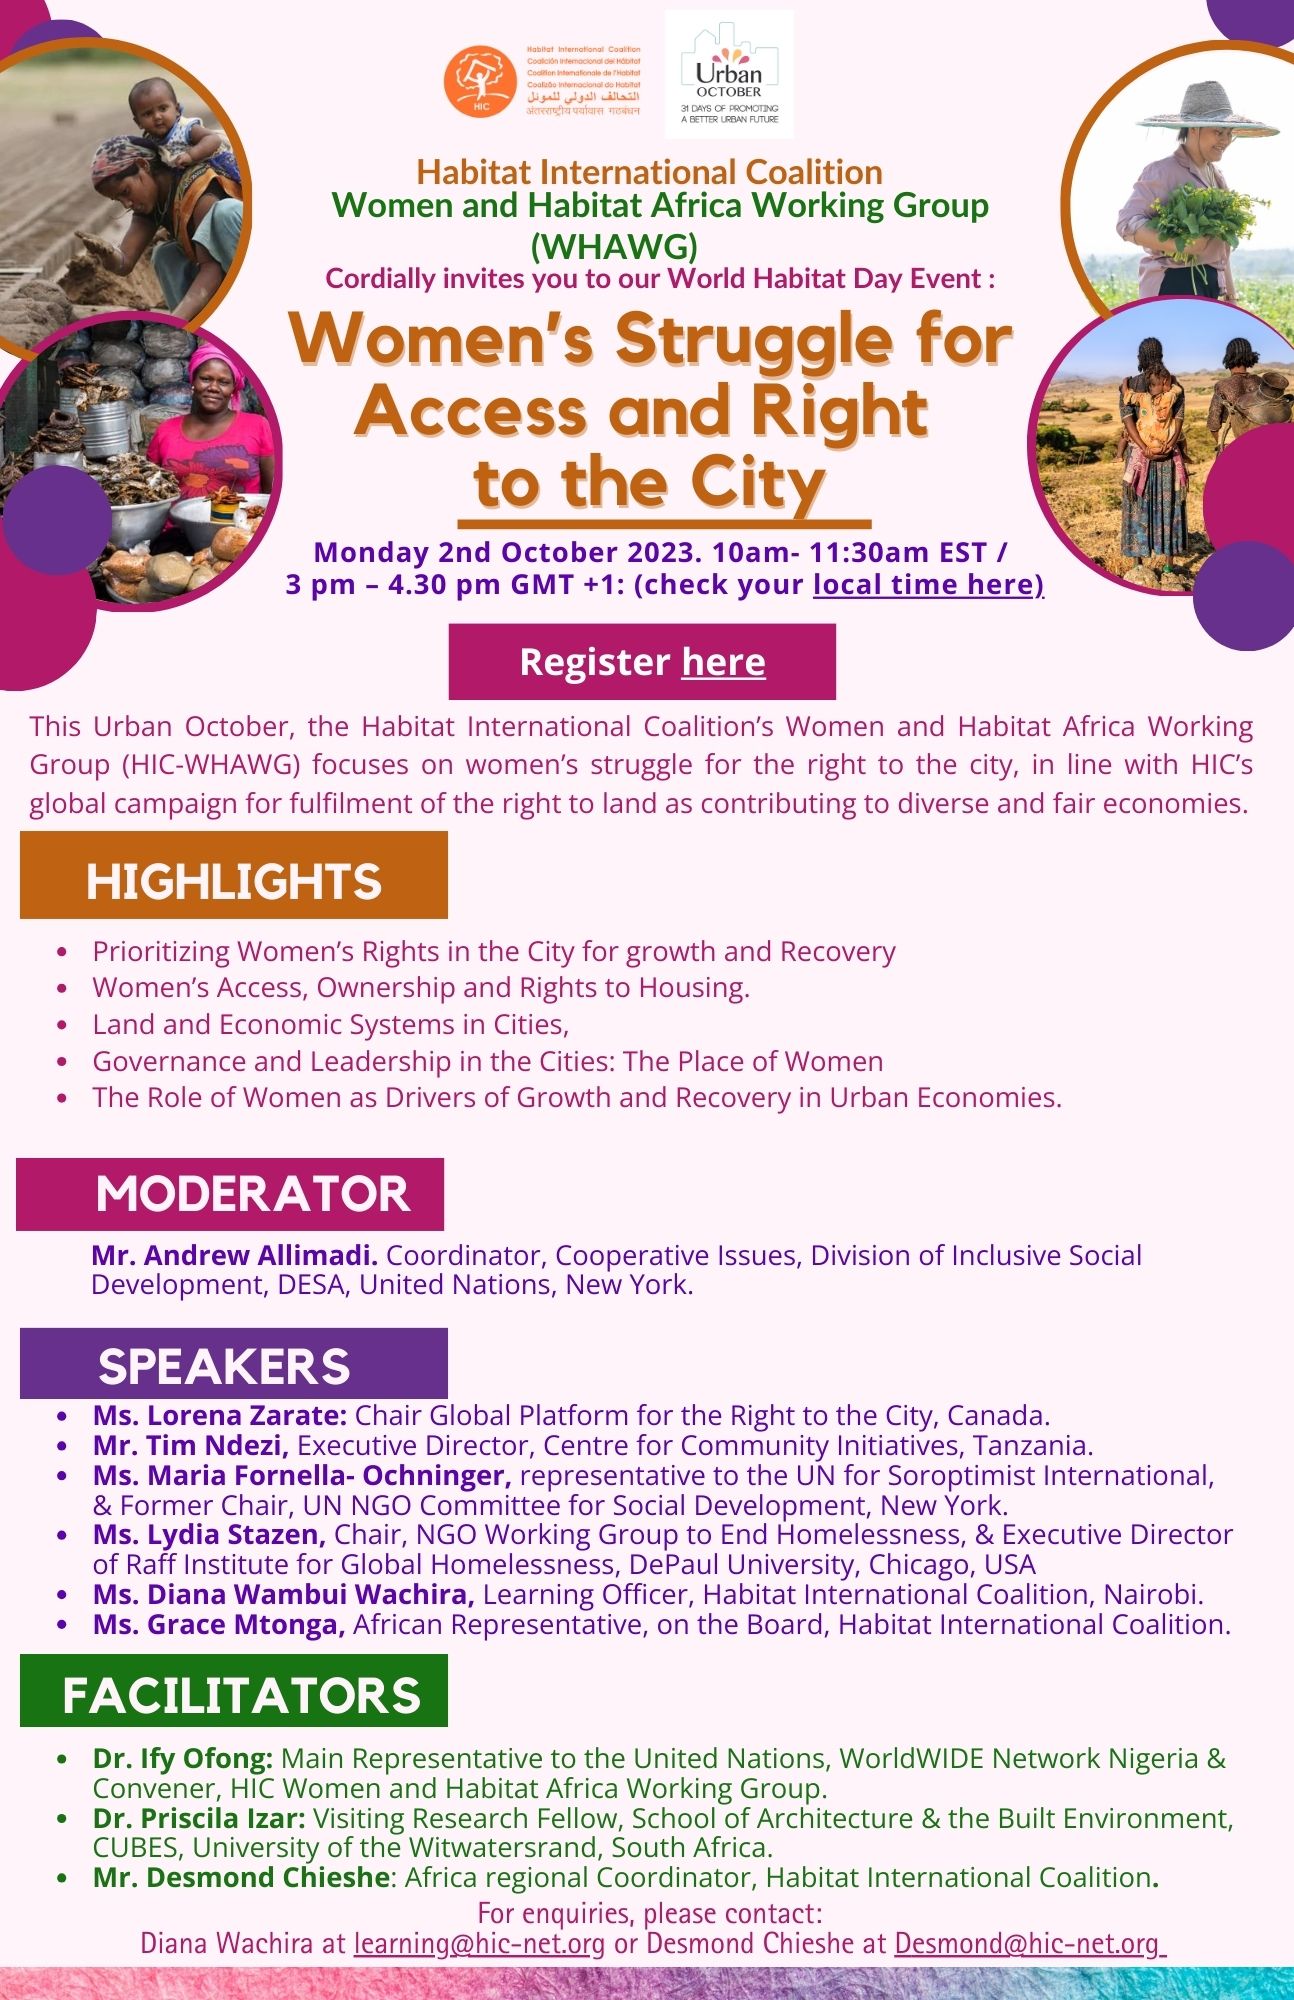 HIC Women and Habitat Africa Working Group (WHAWG) World Habitat Day online webinar : ‘Women’s Struggle for Access and Right to the Cities”